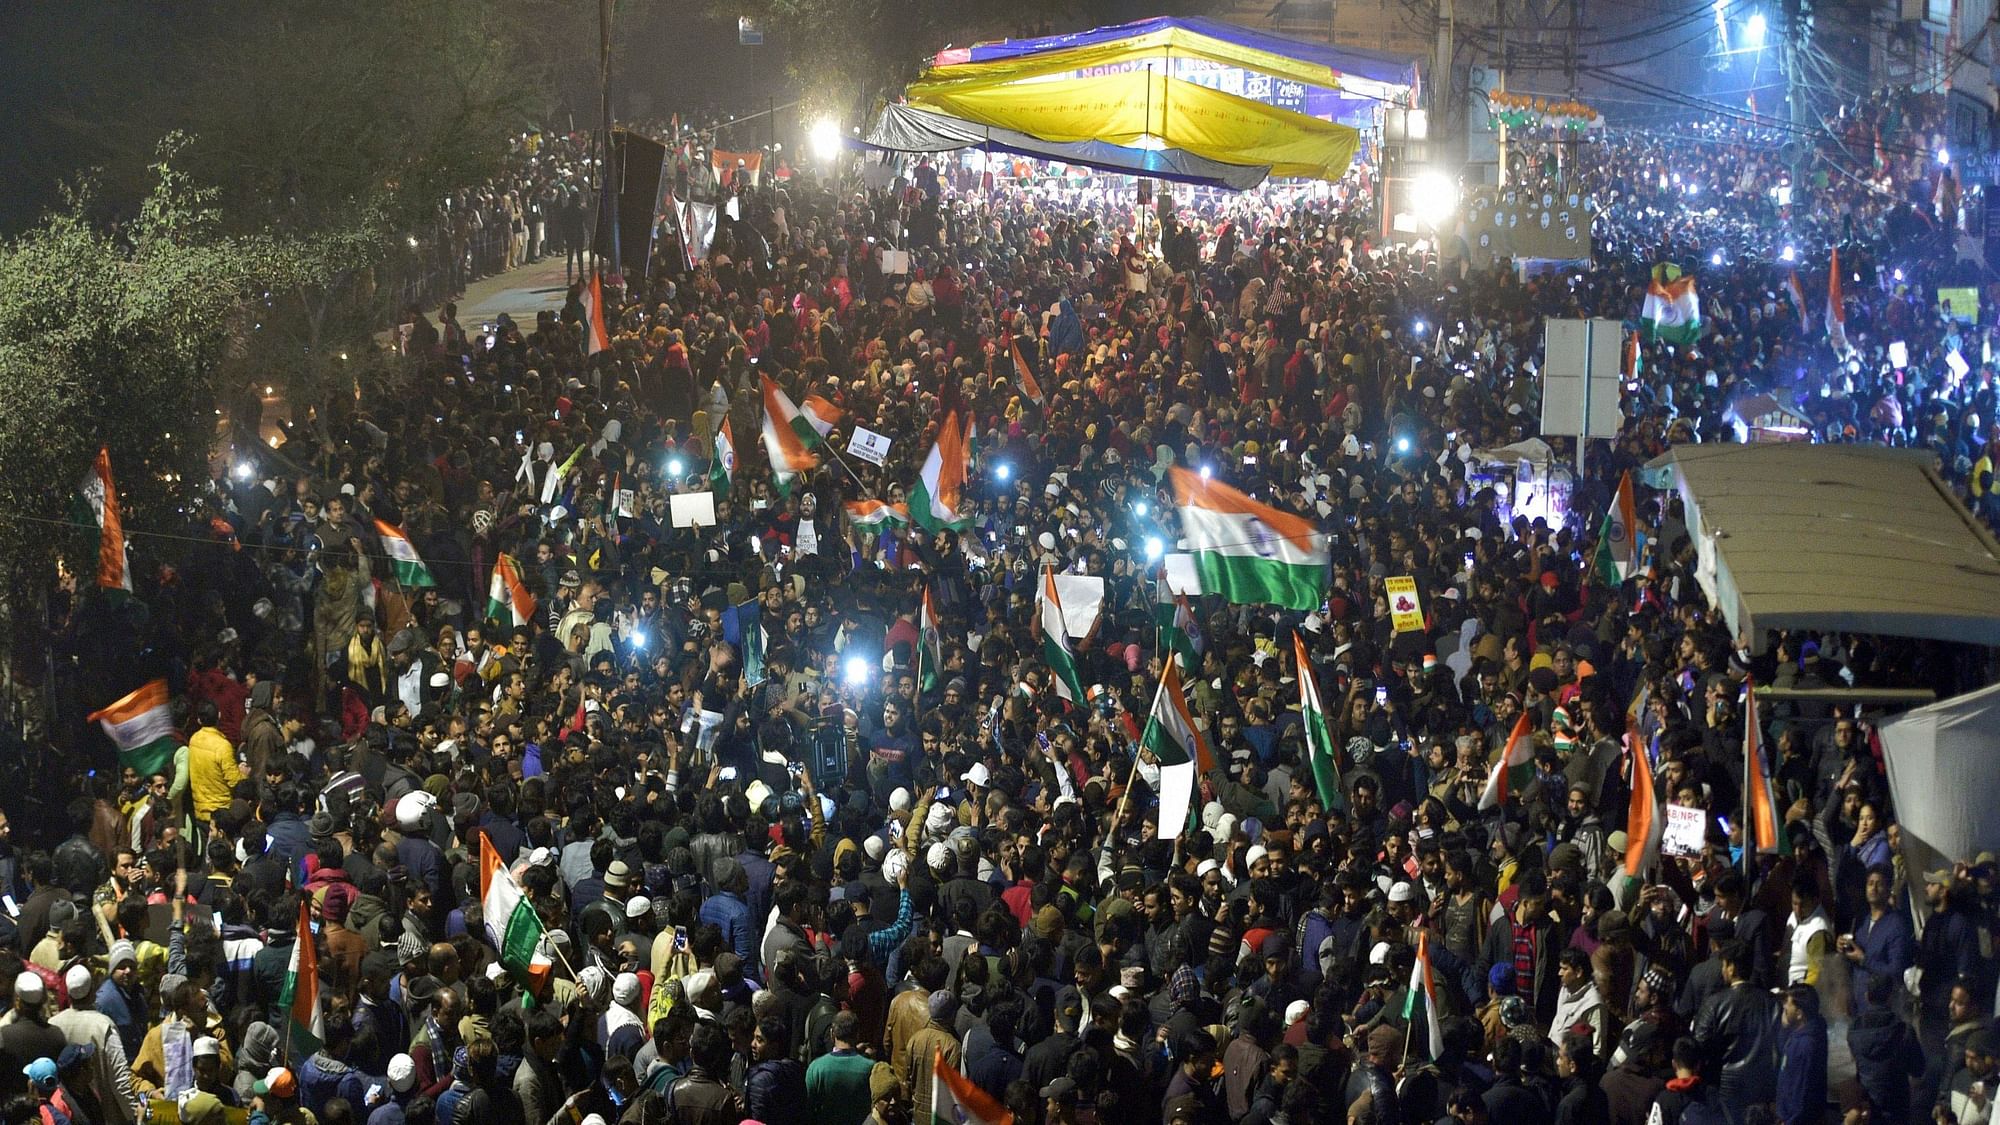 Protesters at a demonstration against Citizenship (Amendment) Act and NRC at Shaheen Bagh in New Delhi. Image used for representational purpose.